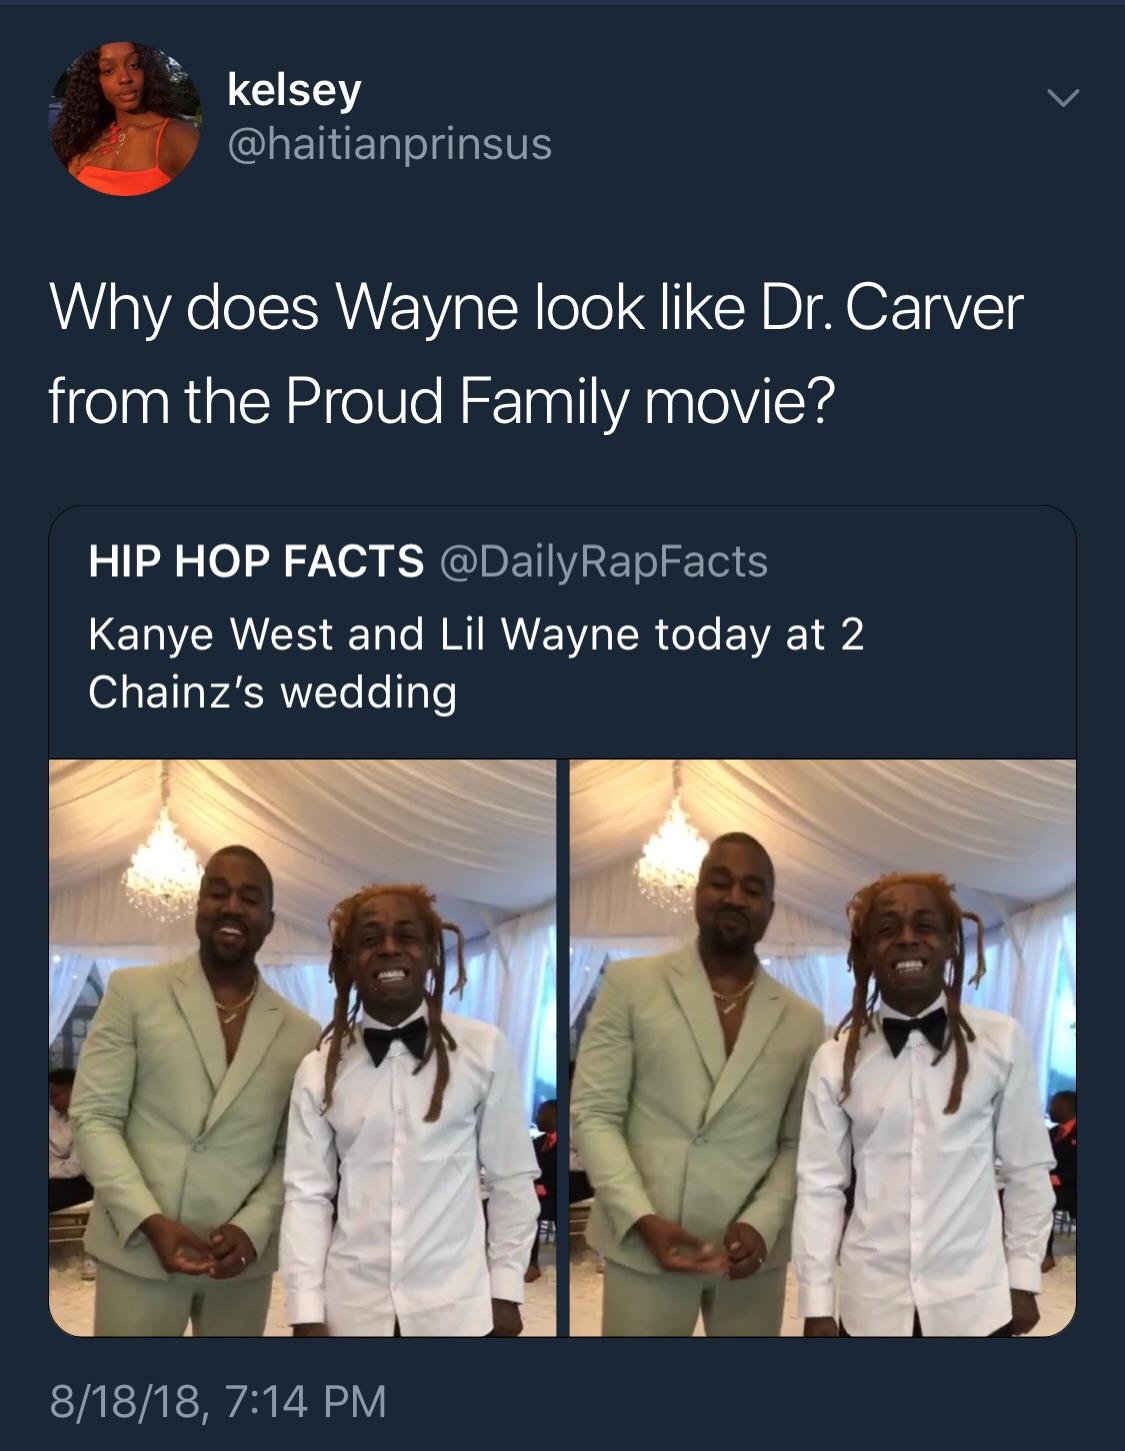 presentation - kelsey Why does Wayne look Dr. Carver from the Proud Family movie? Hip Hop Facts Kanye West and Lil Wayne today at 2 Chainz's wedding 81818,